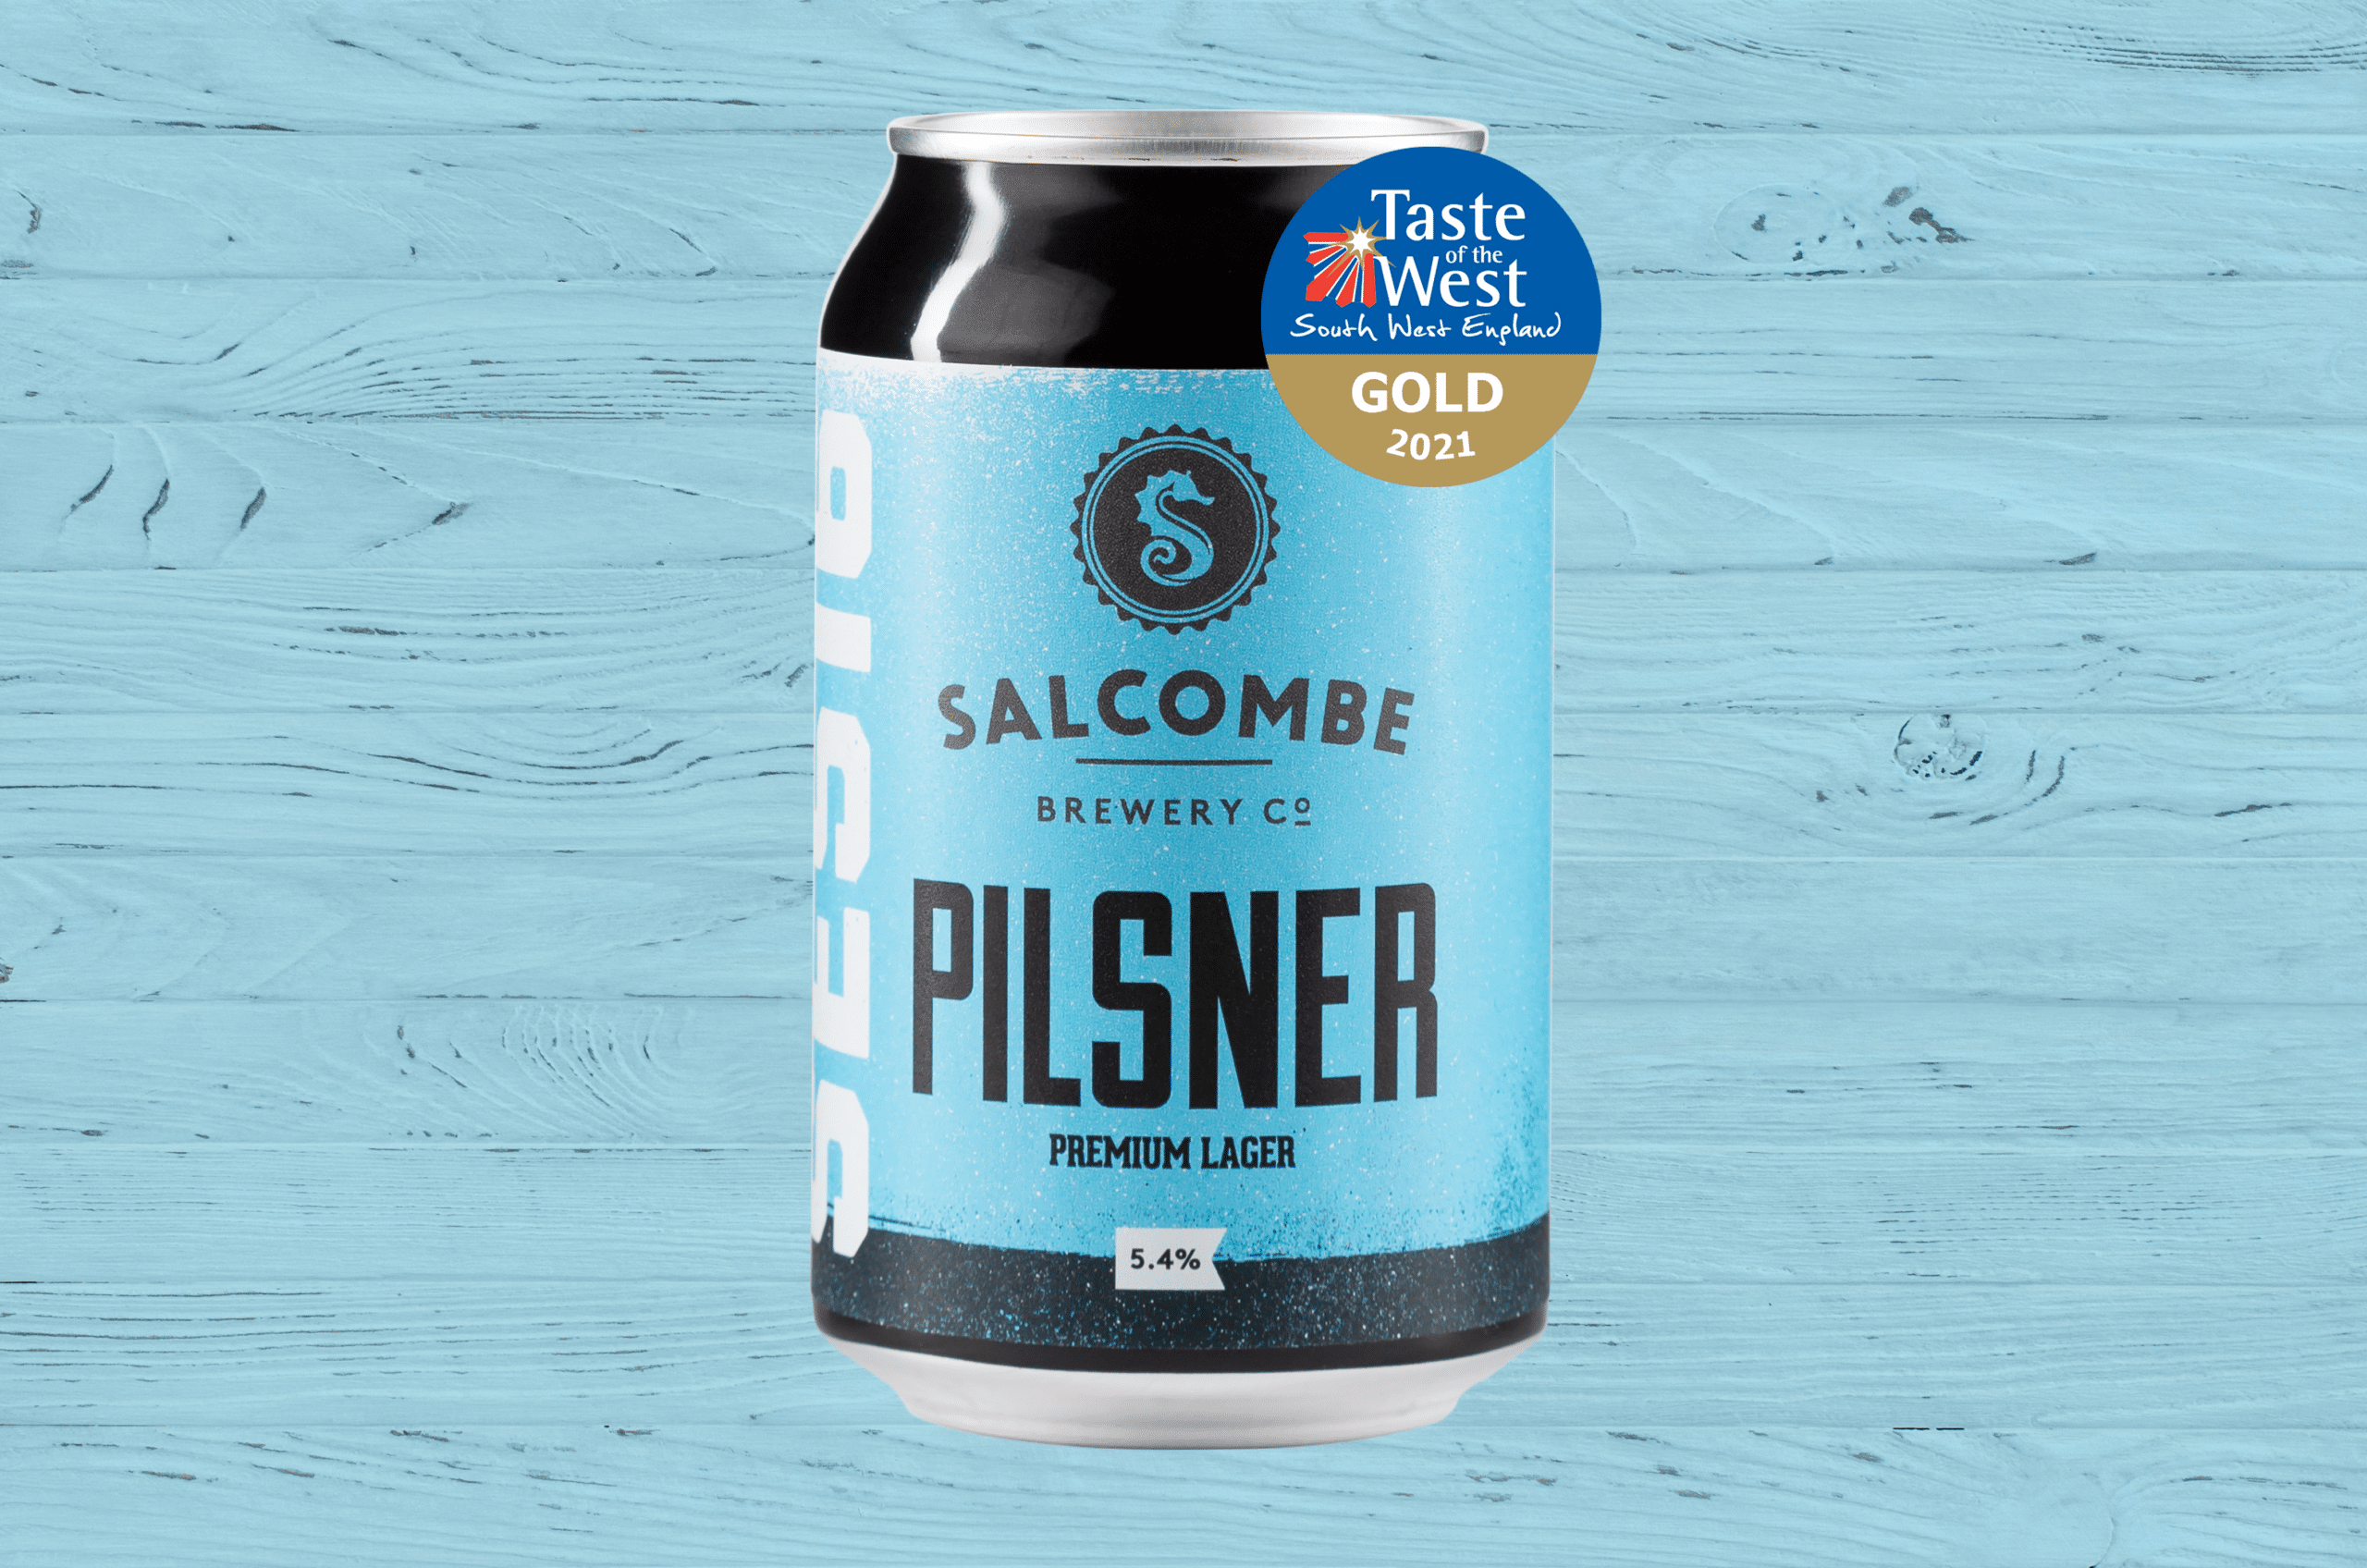 Awards for Salcombe Brewery